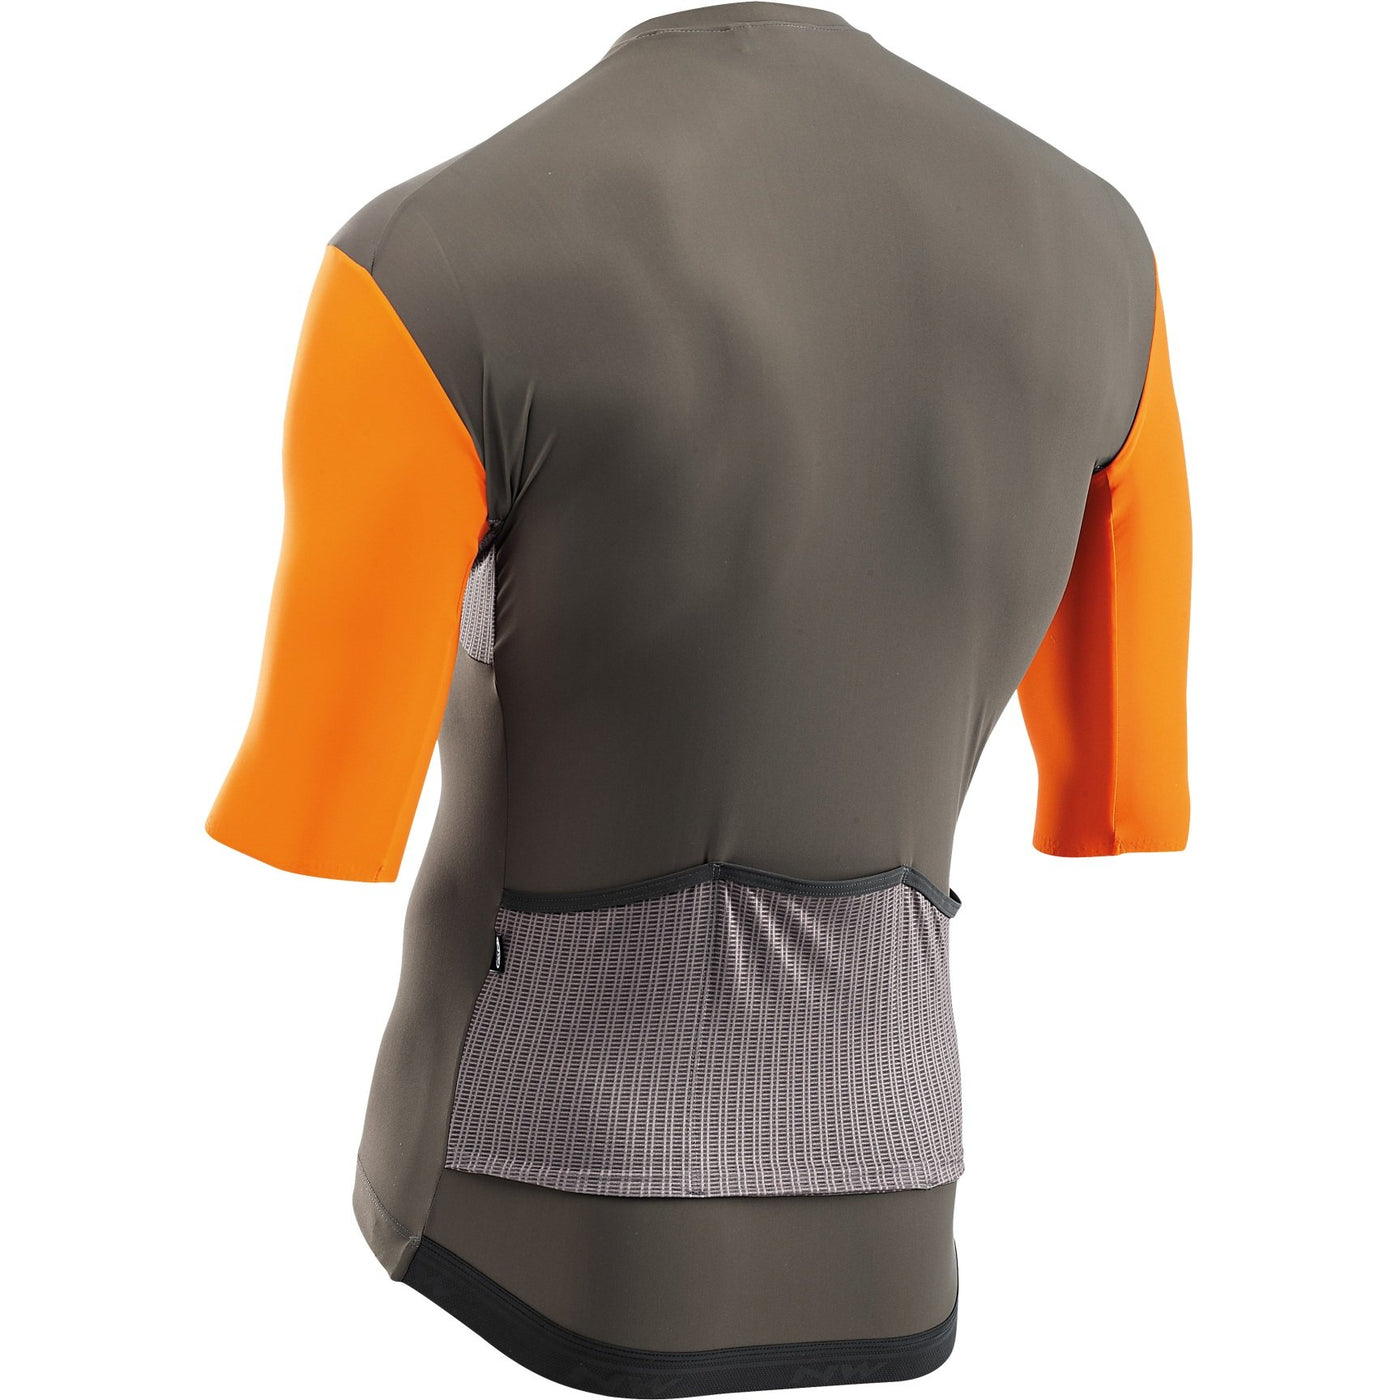 Northwave Extreme Jersey - Dusty Oli/Orange - Cyclop.in